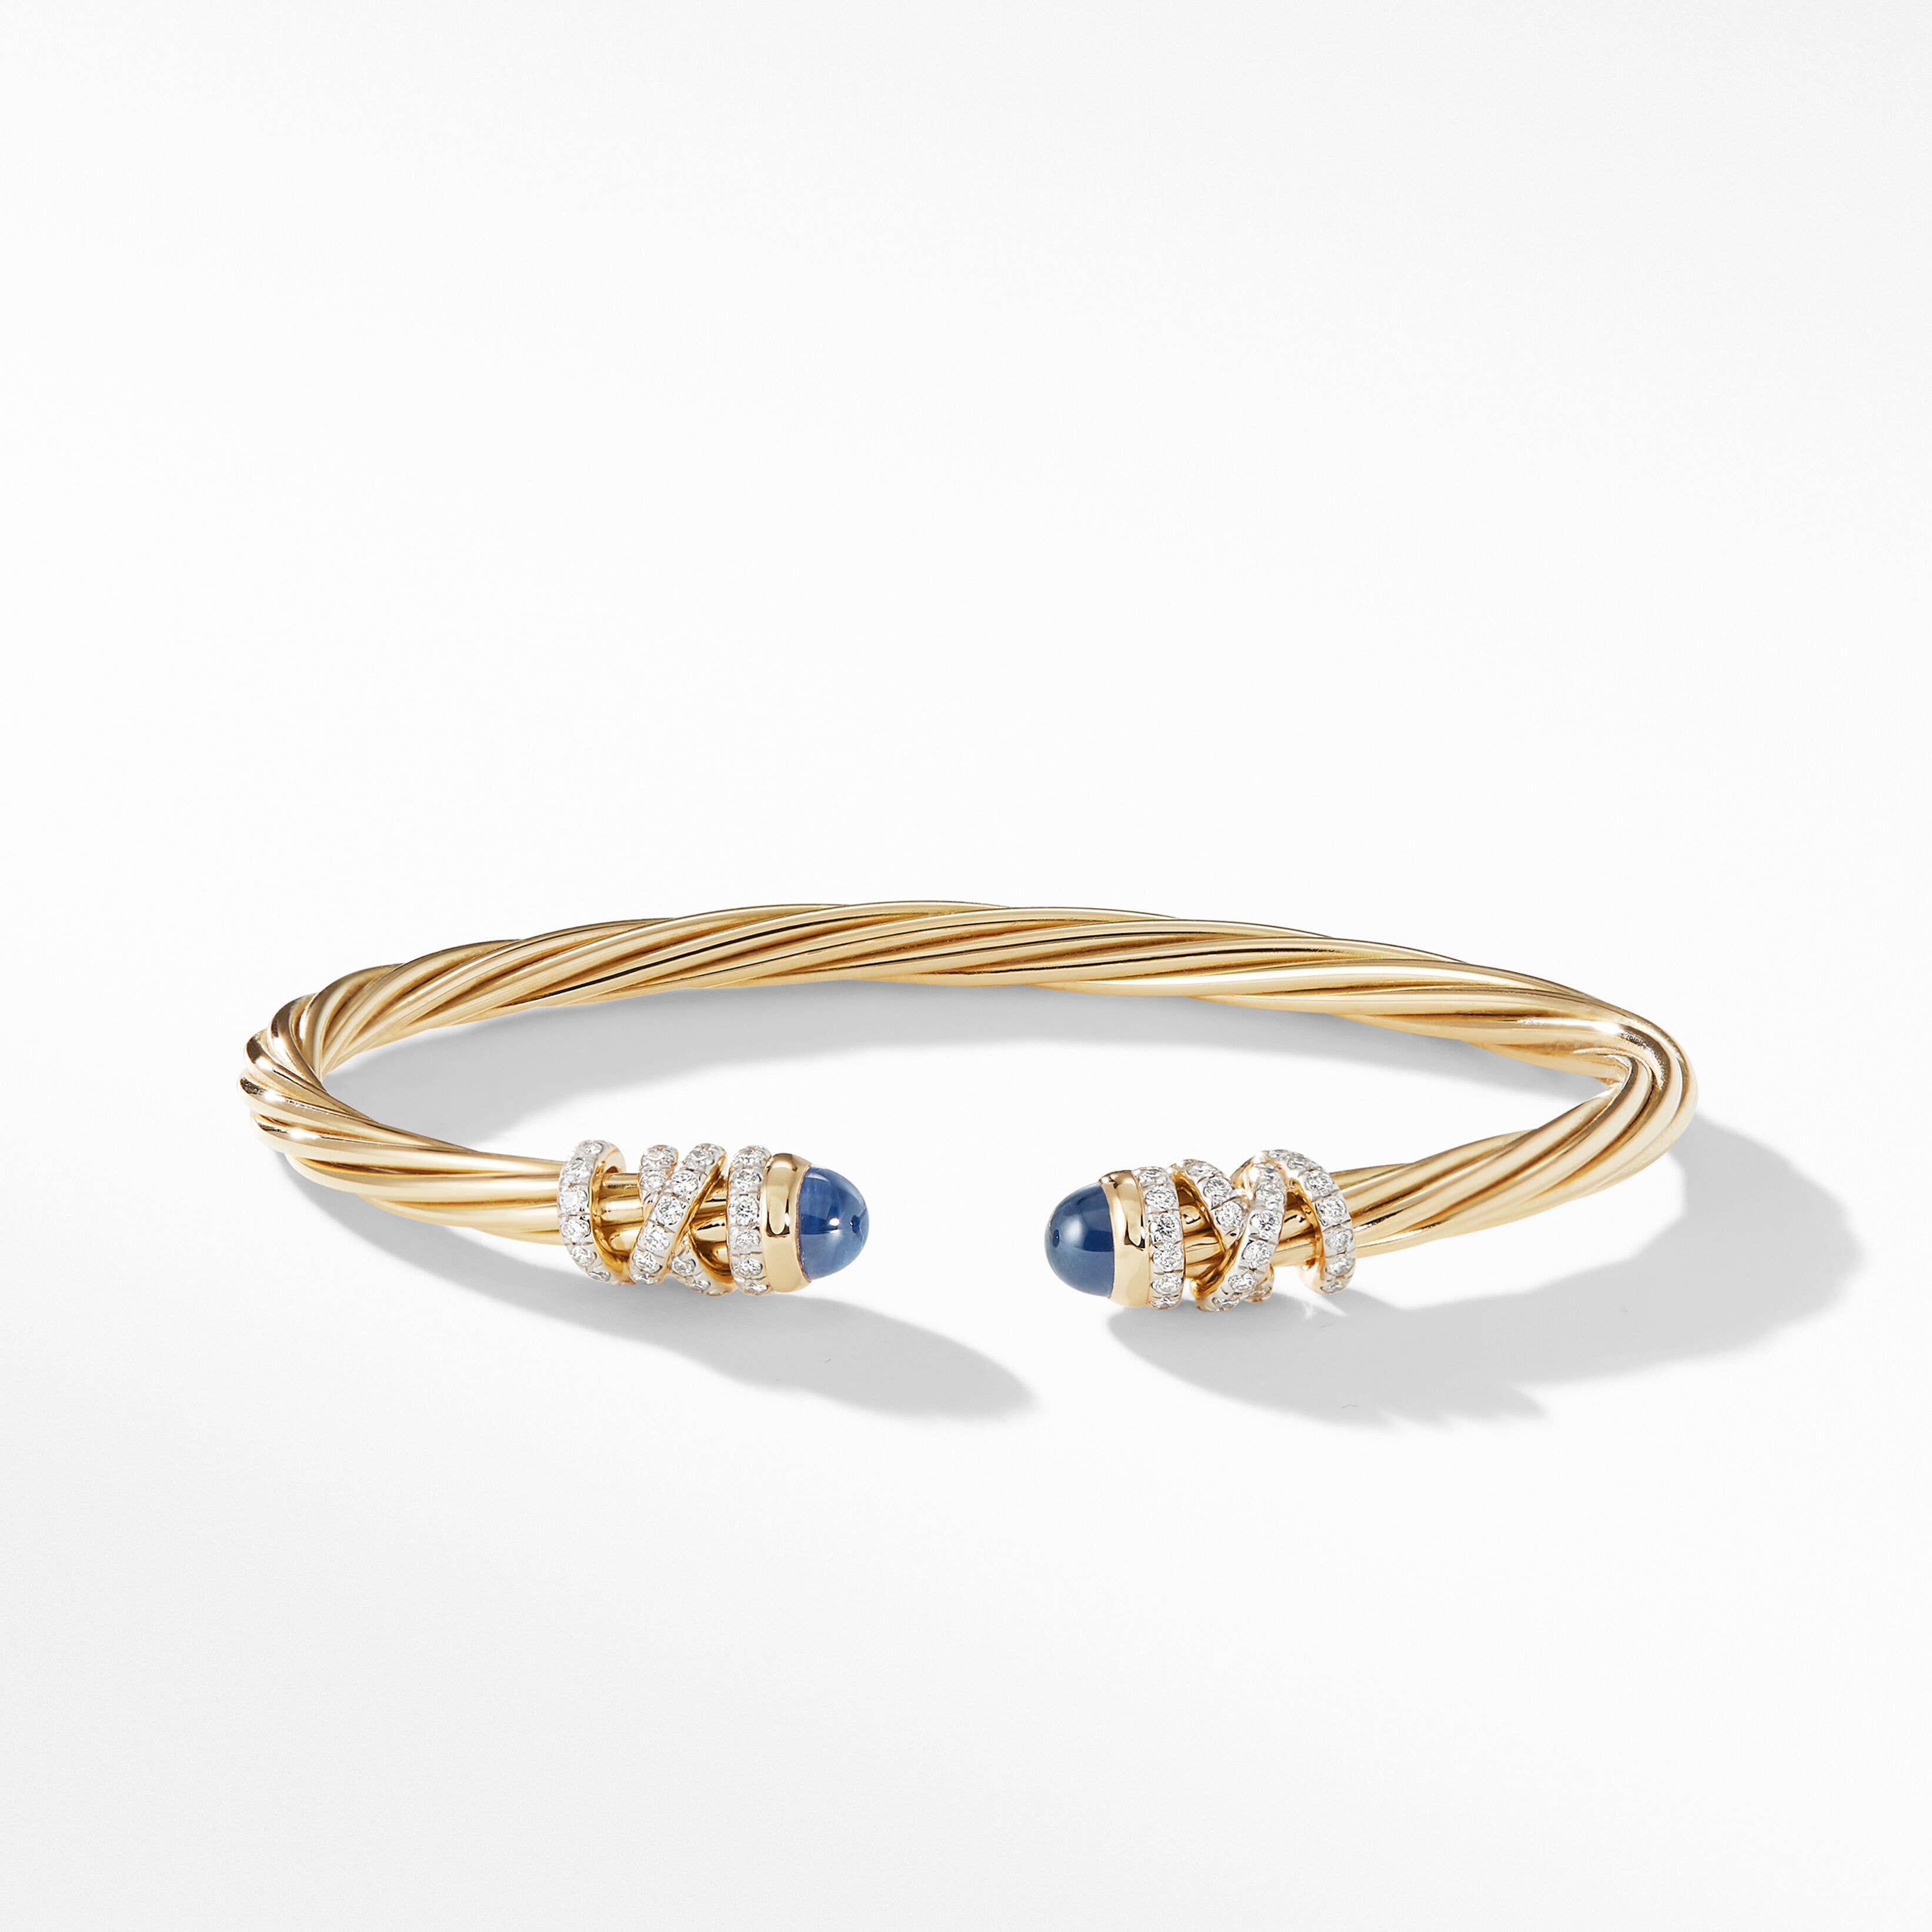 Helena Color Bracelet in 18K Yellow Gold with Blue Sapphires and Pavé Diamonds